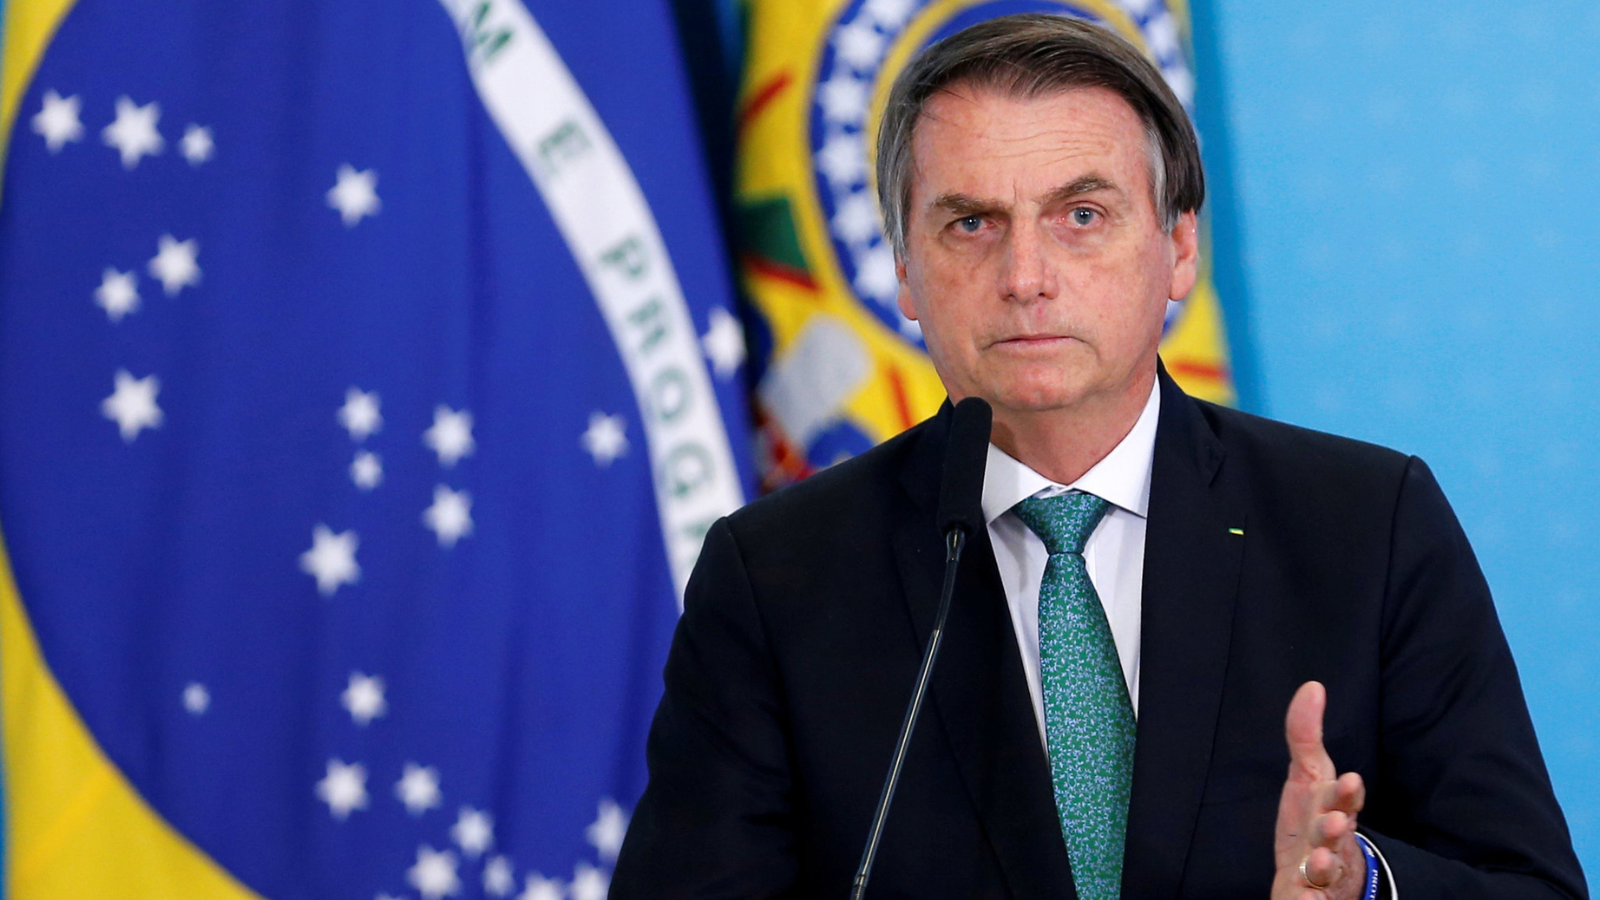 Bolsonaro is now under investigation for the attempted coup in Brasilia